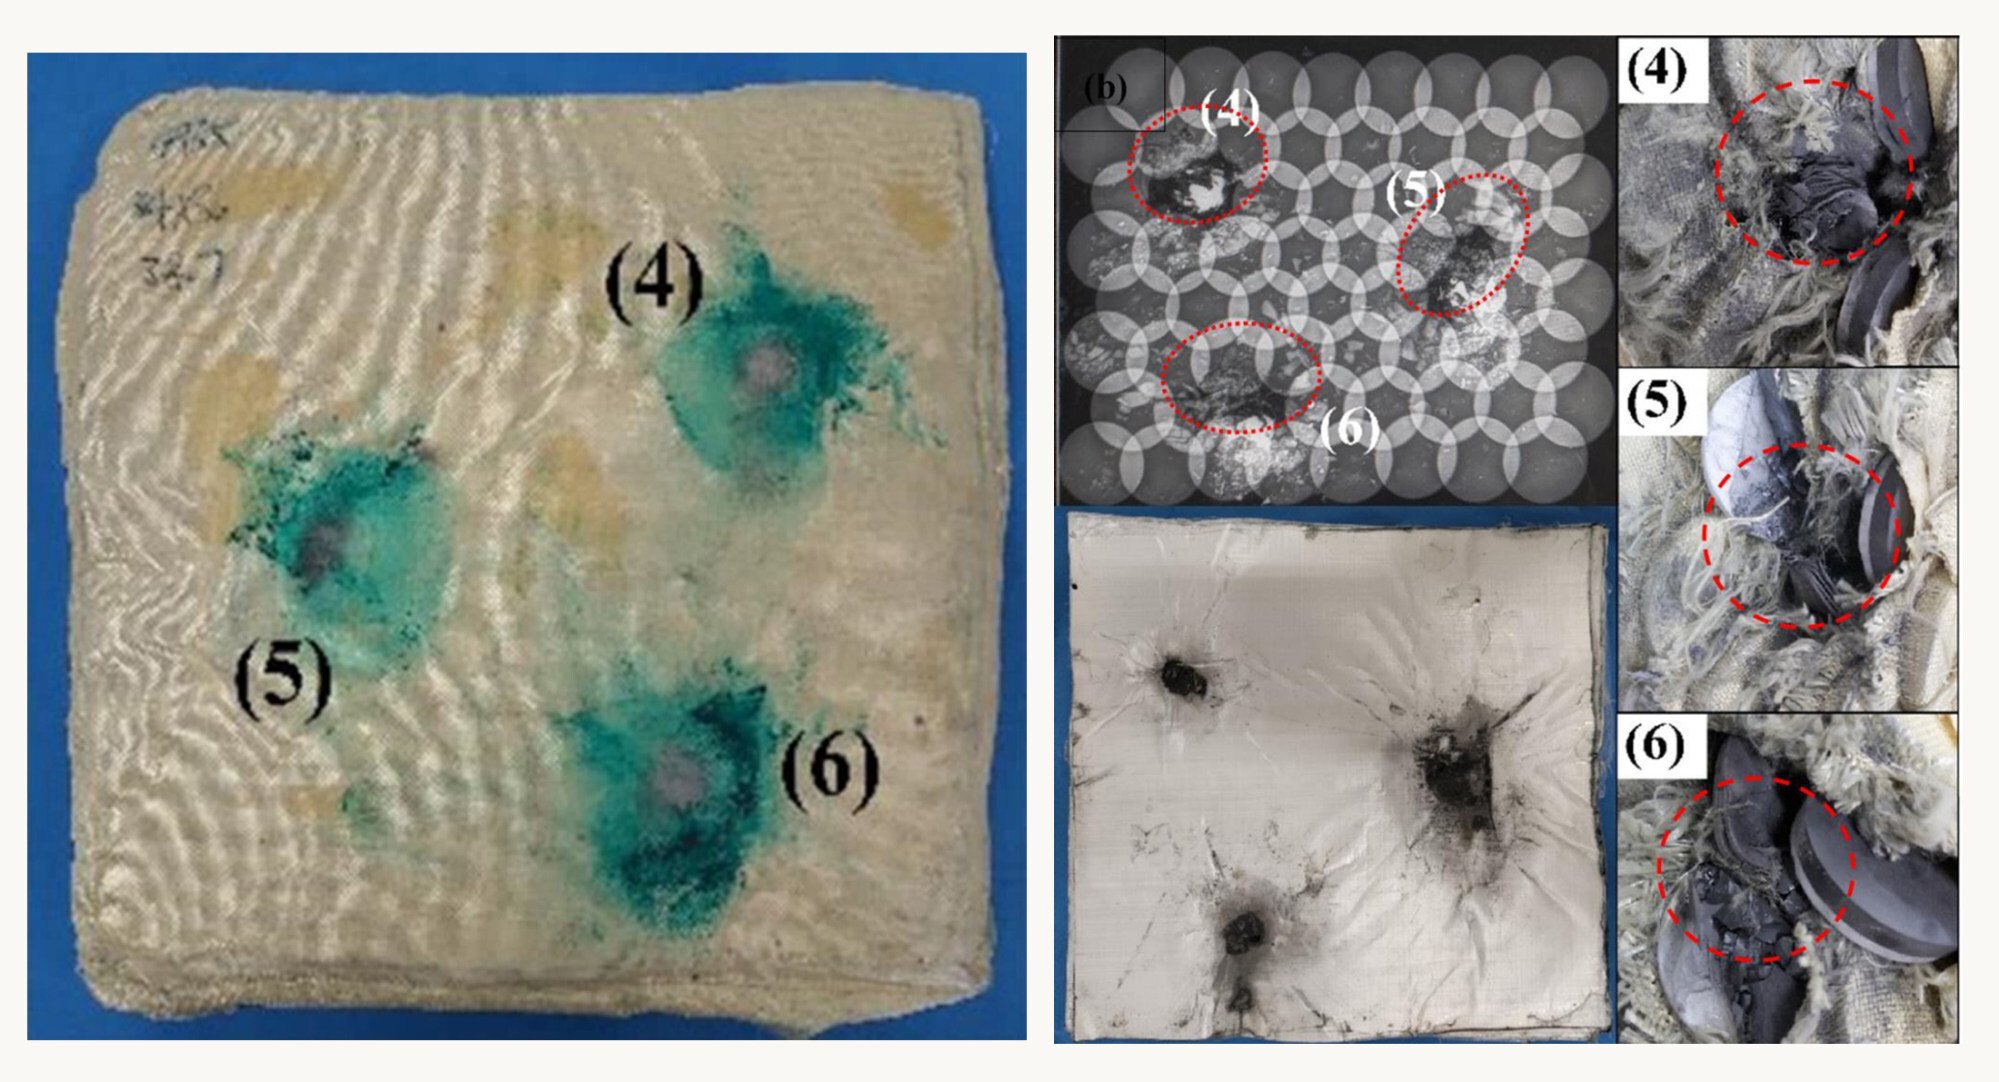 The aftermath of the tests: Left: The back of the scaled armour after the test; right: an X-ray and photograph of the scaled amour after being hit by three armour-piercing incendiary bullets. Images: Zhu Deju/Hunan University